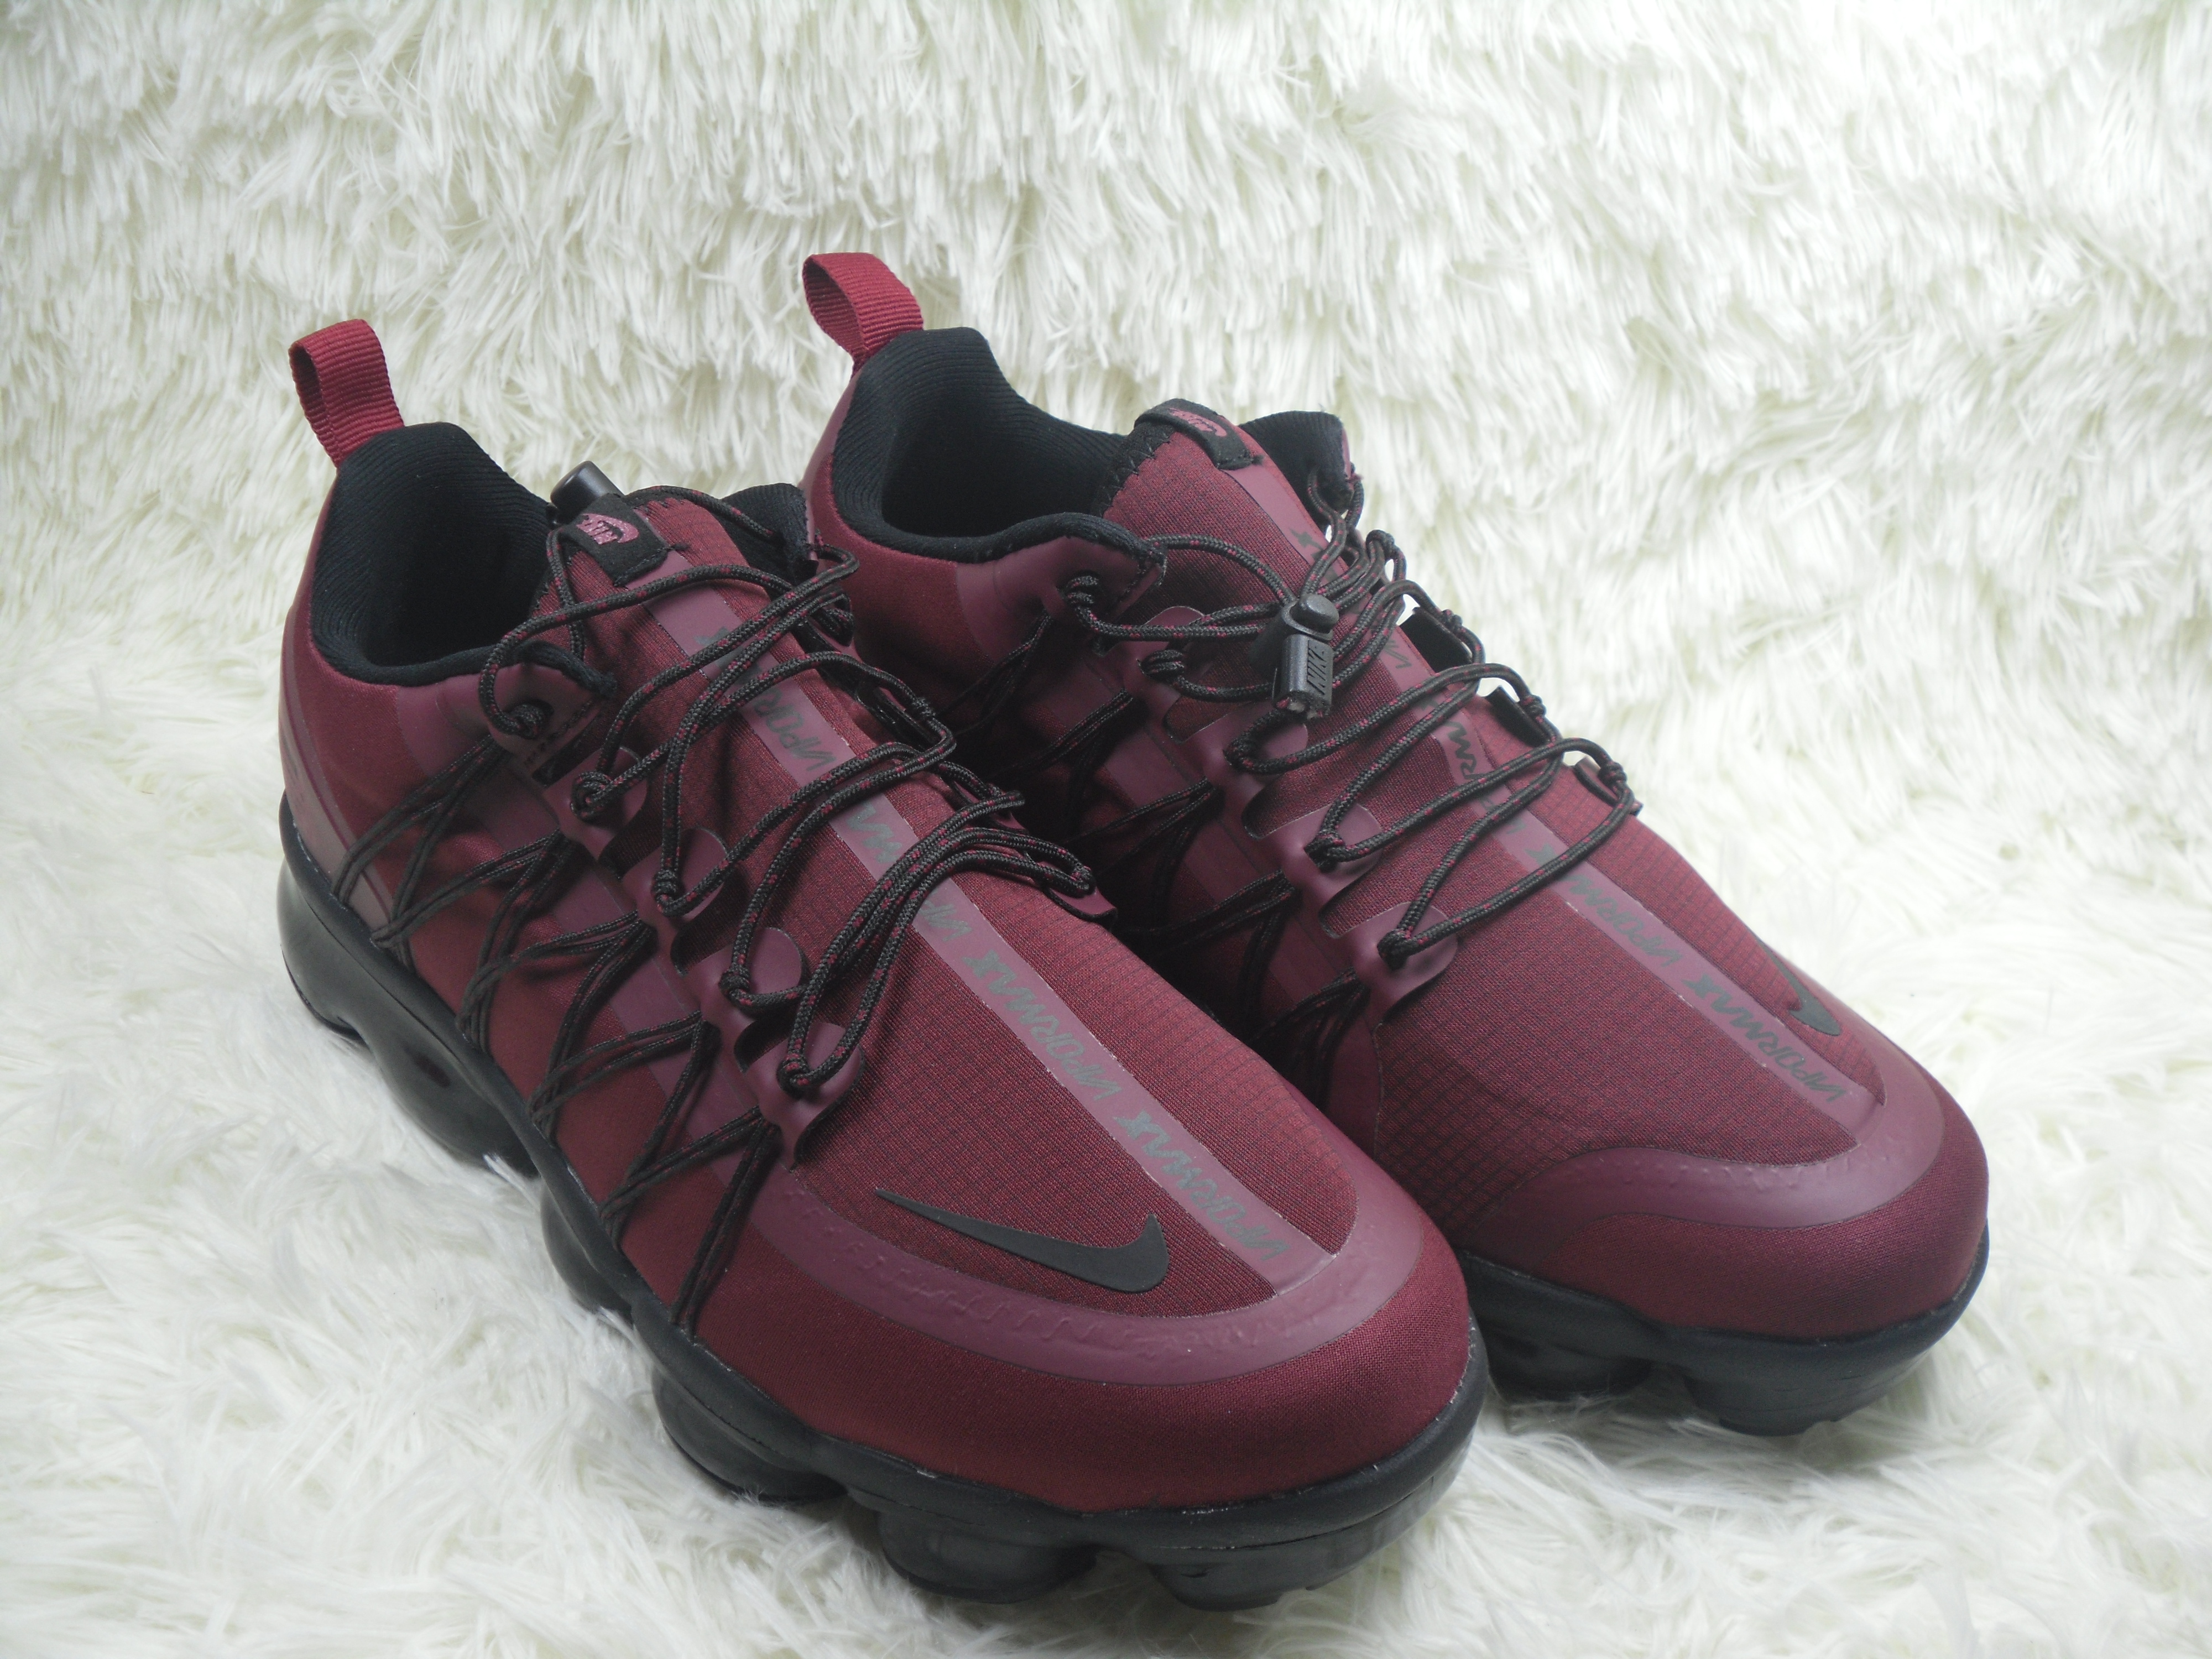 NIKE SP W Air VaporMax Run Utlty Wine Red Black Shoes - Click Image to Close